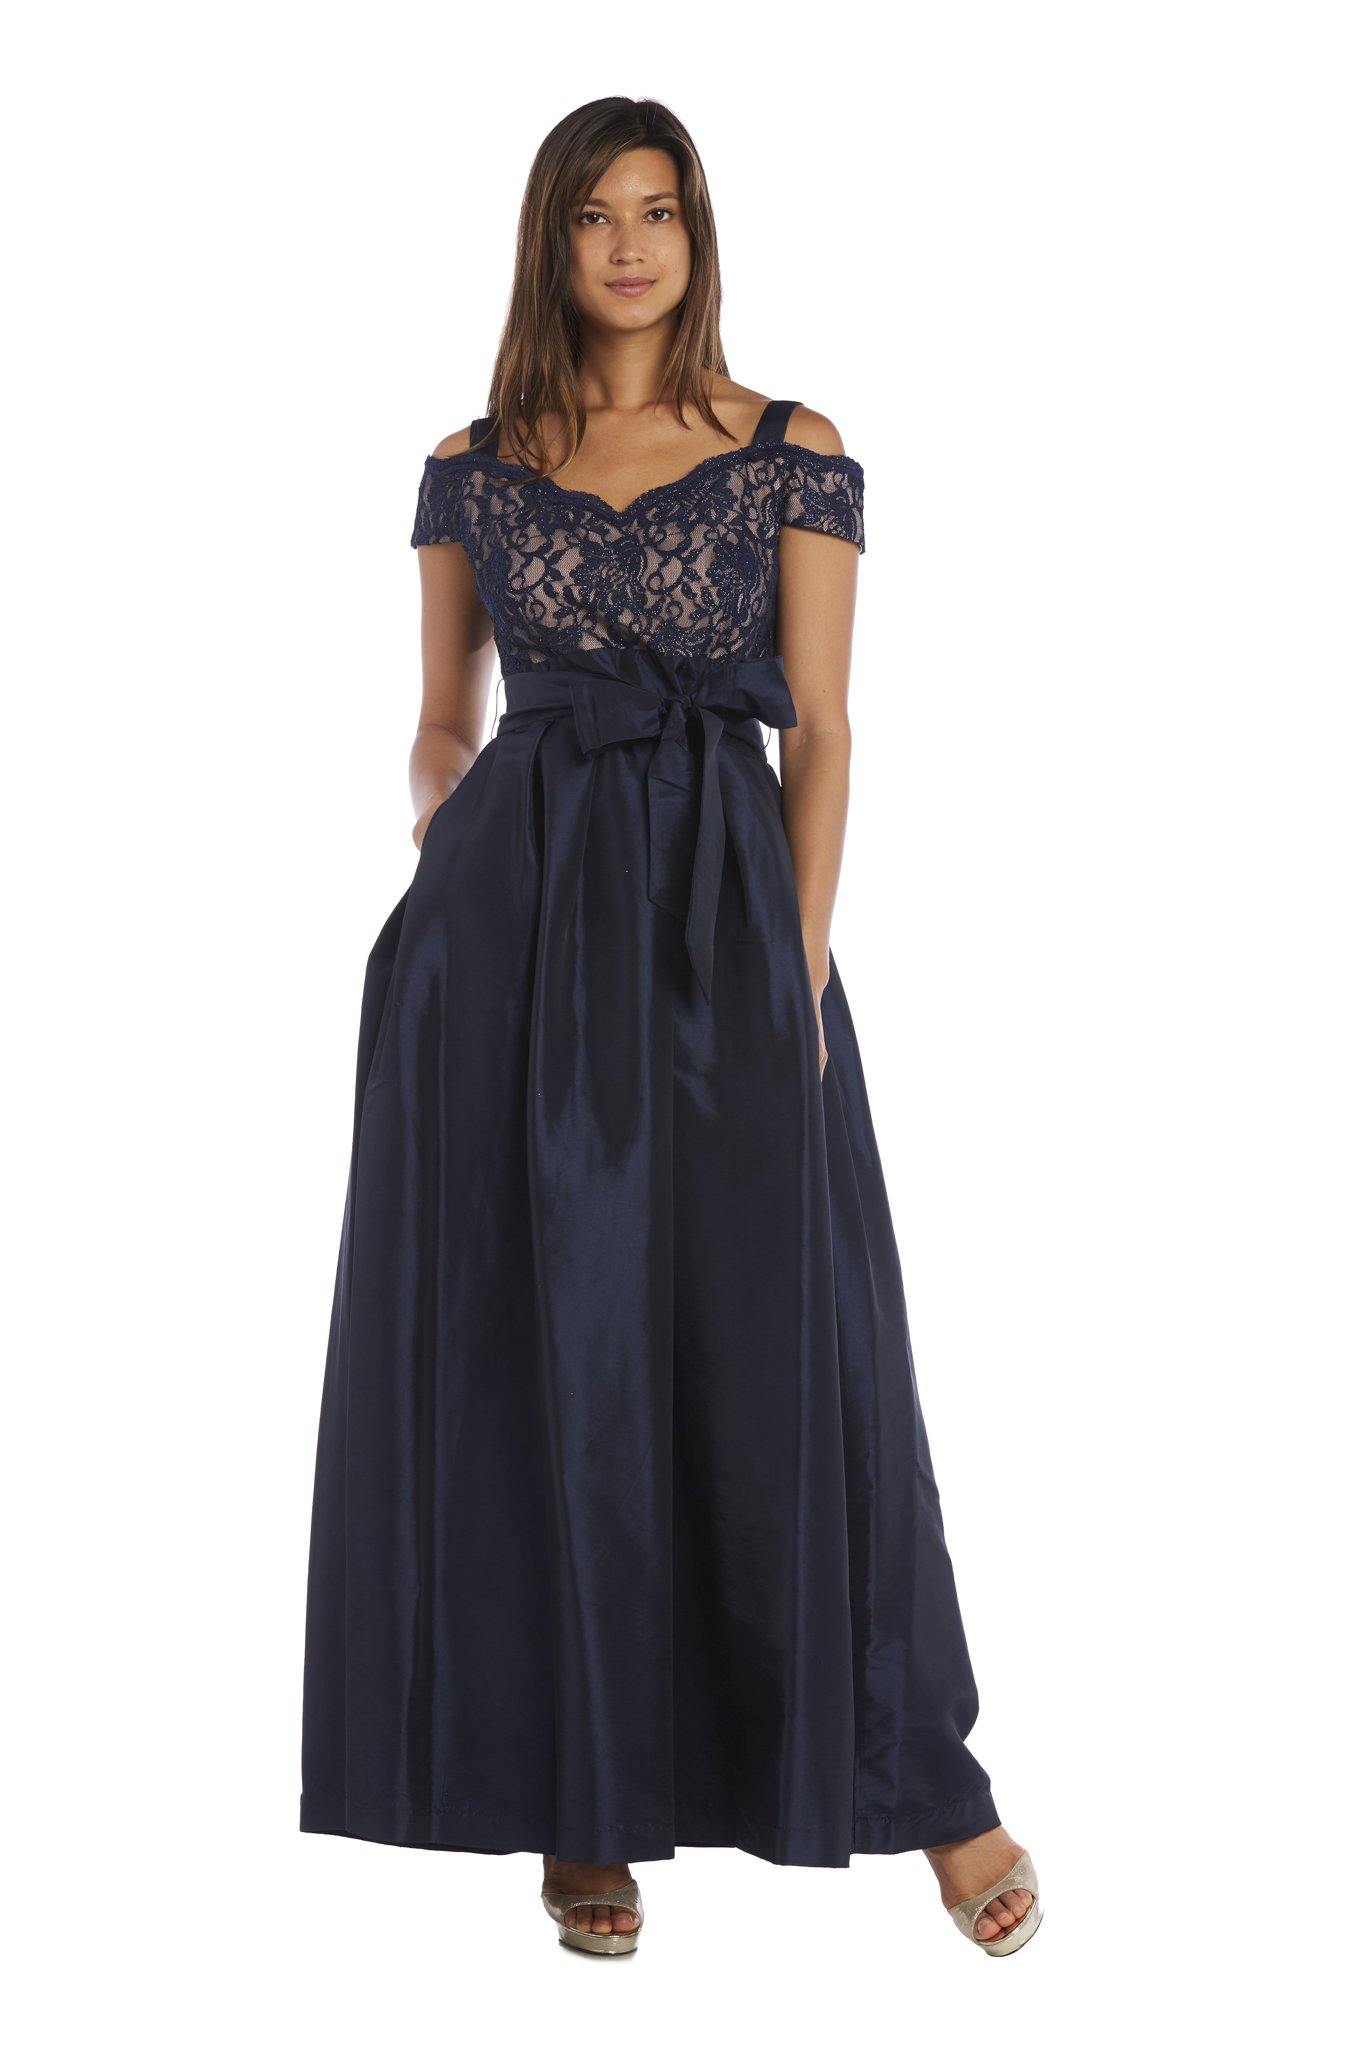 R&M Richards Evening Long Formal Lace Top Dress 2056 - The Dress Outlet